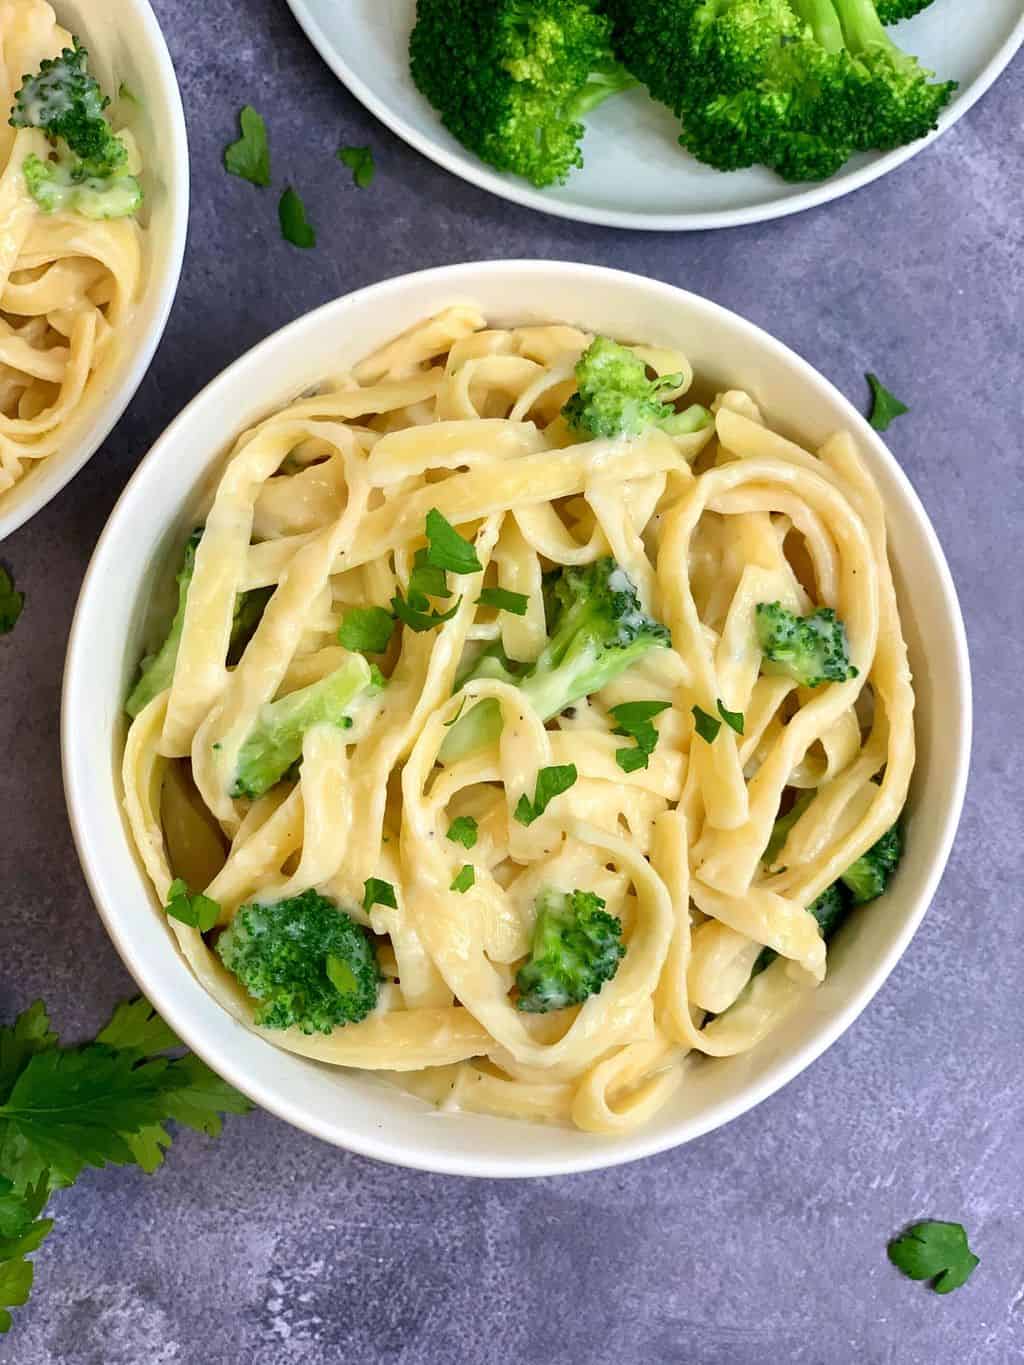 fettuccini alfredo pasta served in a white bowl with steamed broccoli on the side